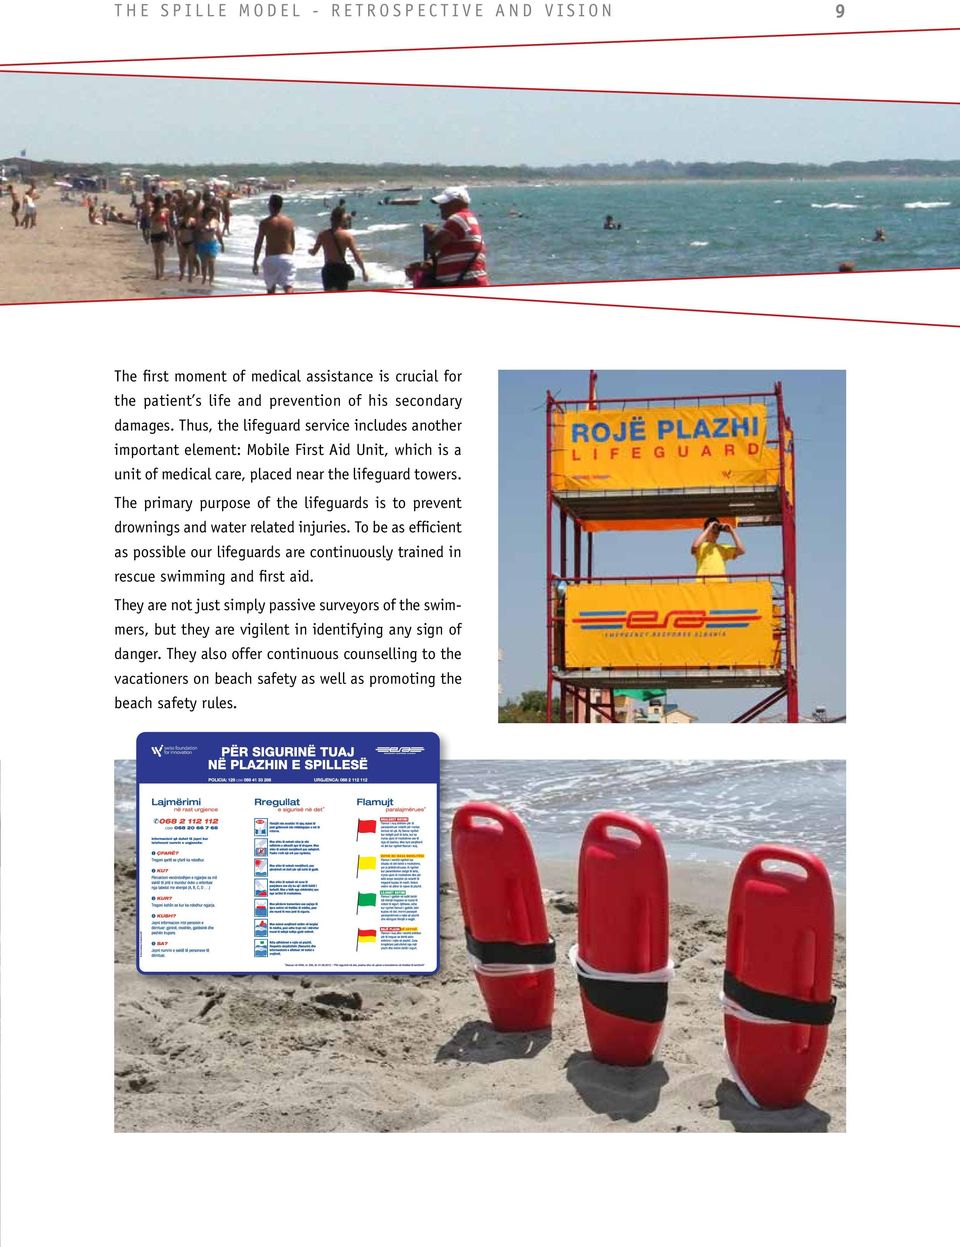 The primary purpose of the lifeguards is to prevent drownings and water related injuries.